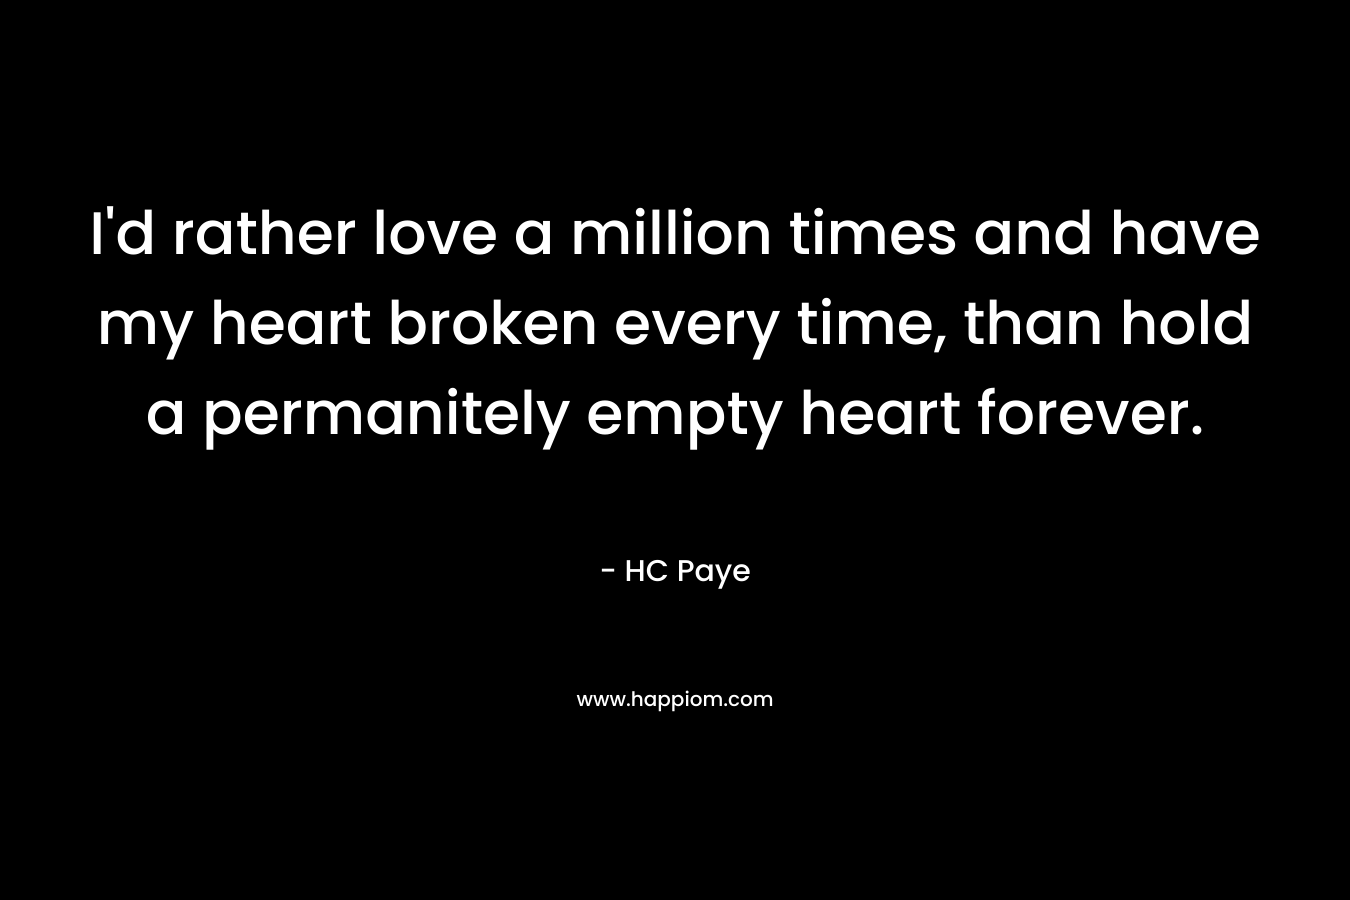 I'd rather love a million times and have my heart broken every time, than hold a permanitely empty heart forever.